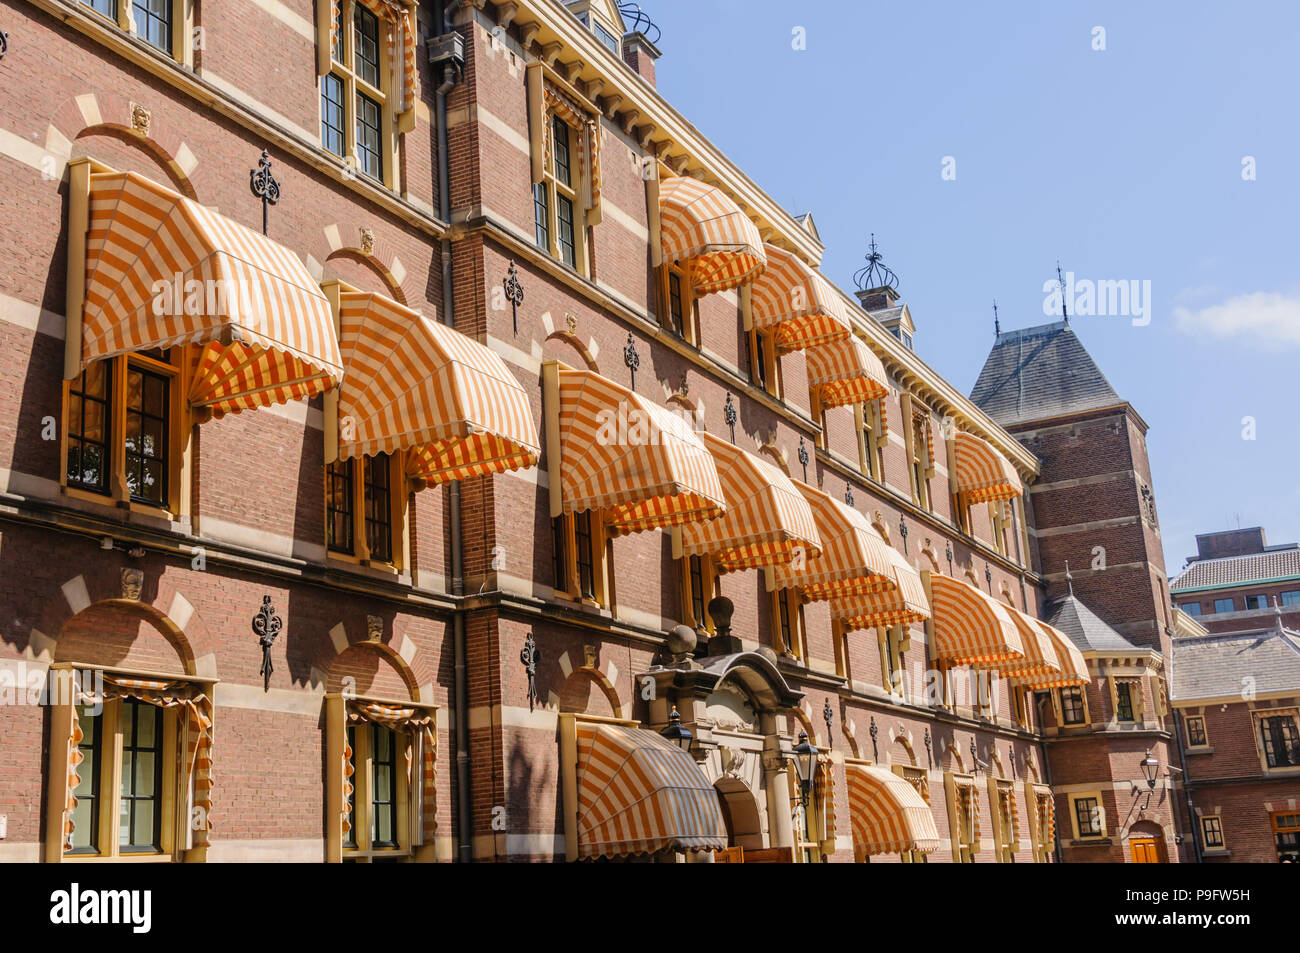 Striped fabric awnings provide shade over the windows of a building inside the Binnenhof, The Hague, Netherlands Stock Photo